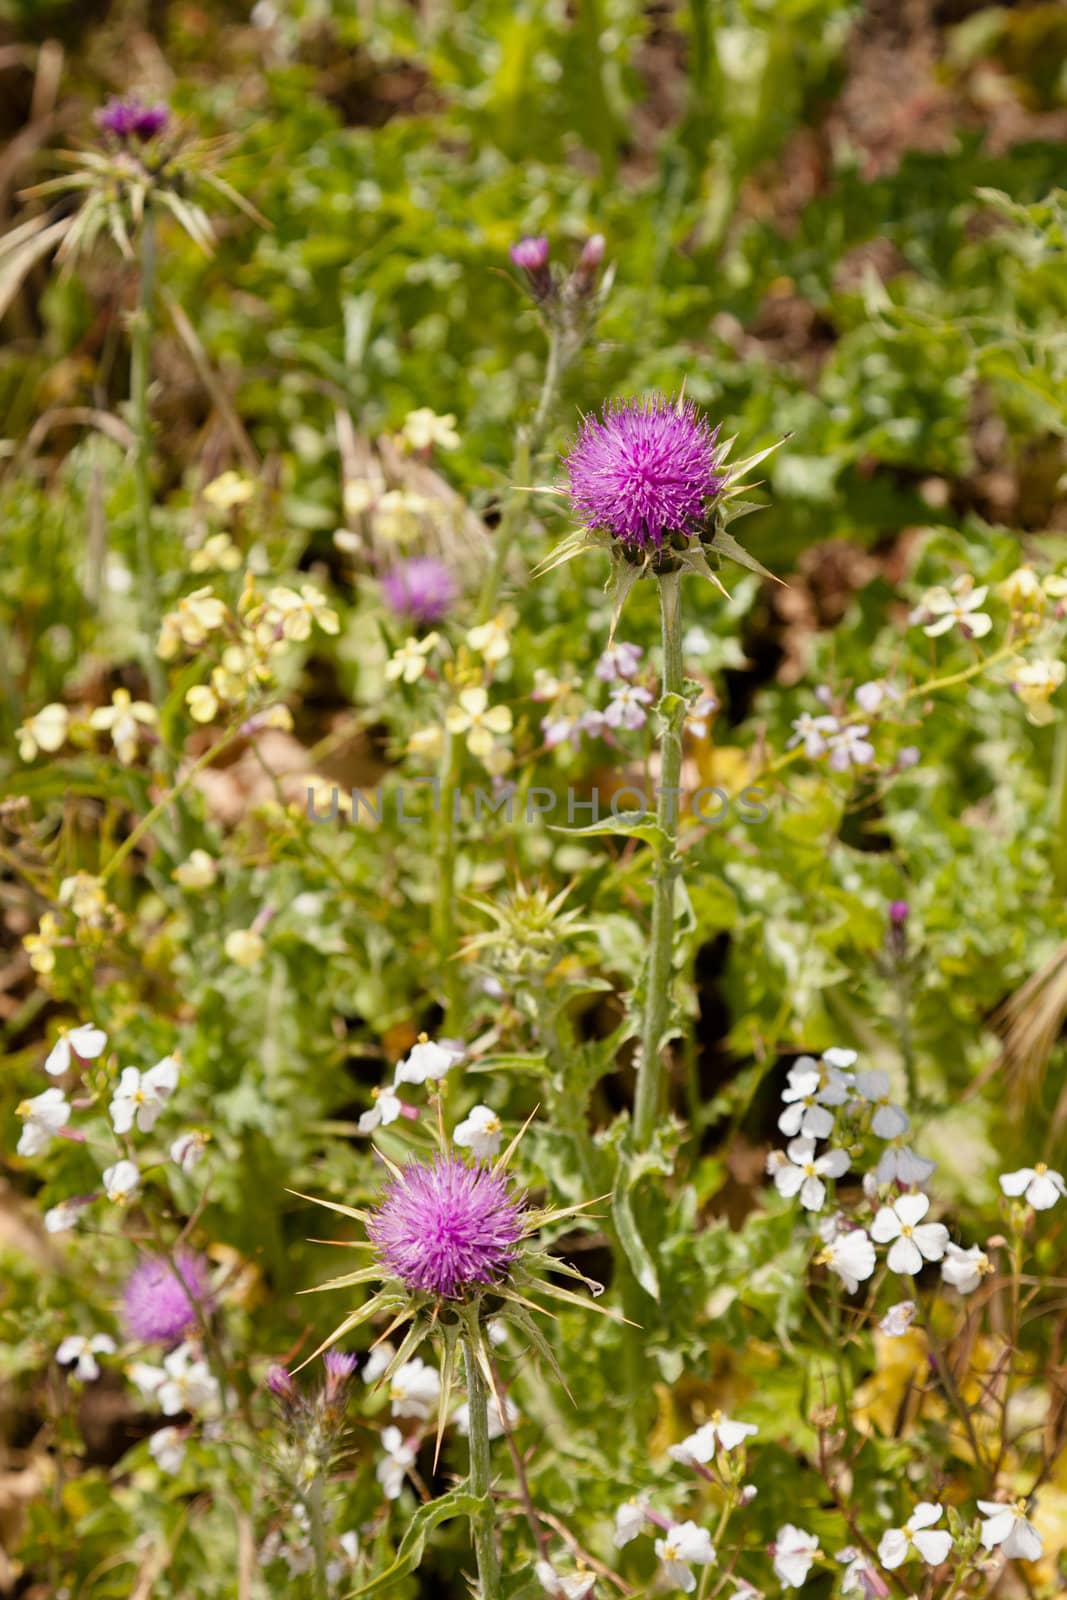 Cirsium occidentale, with the common name Cobwebby thistle, is a species of thistle native throughout California deserts, mountains, and valleys